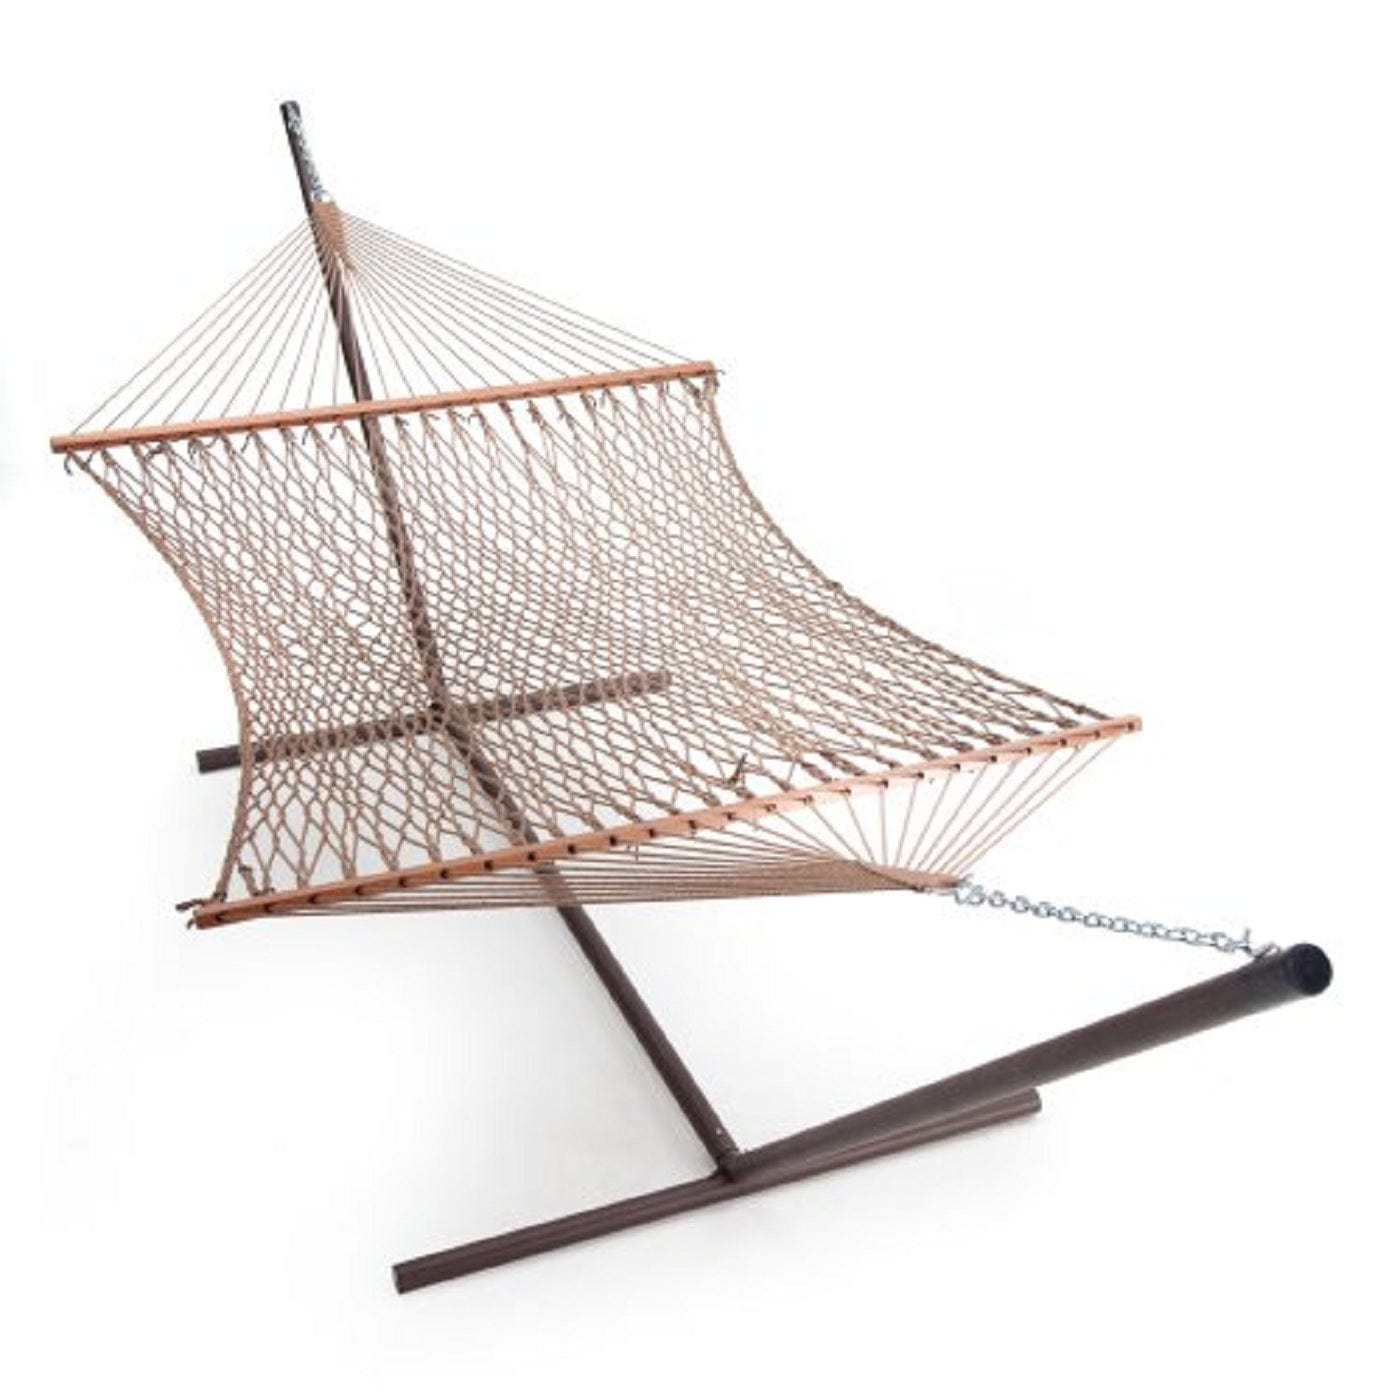 Outdoor UV Resistant Hammock Furniture With Stand Frame, Weight Capacity of 200 kg